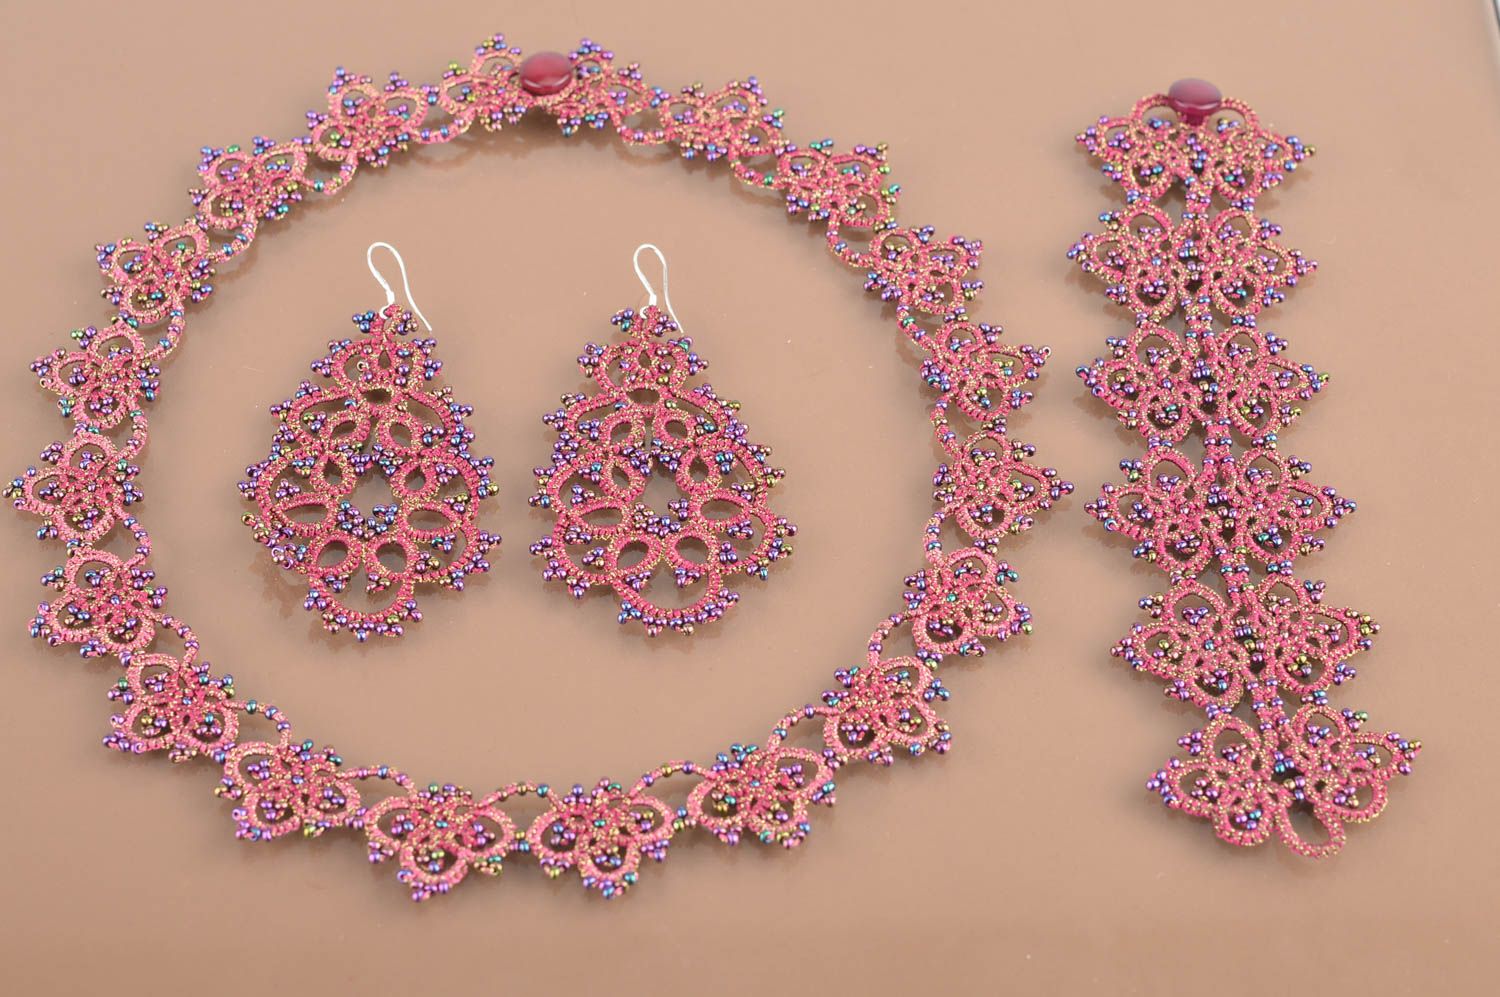 Handmade purple lace tatted jewelry set 3 items earrings bracelet and necklace photo 5